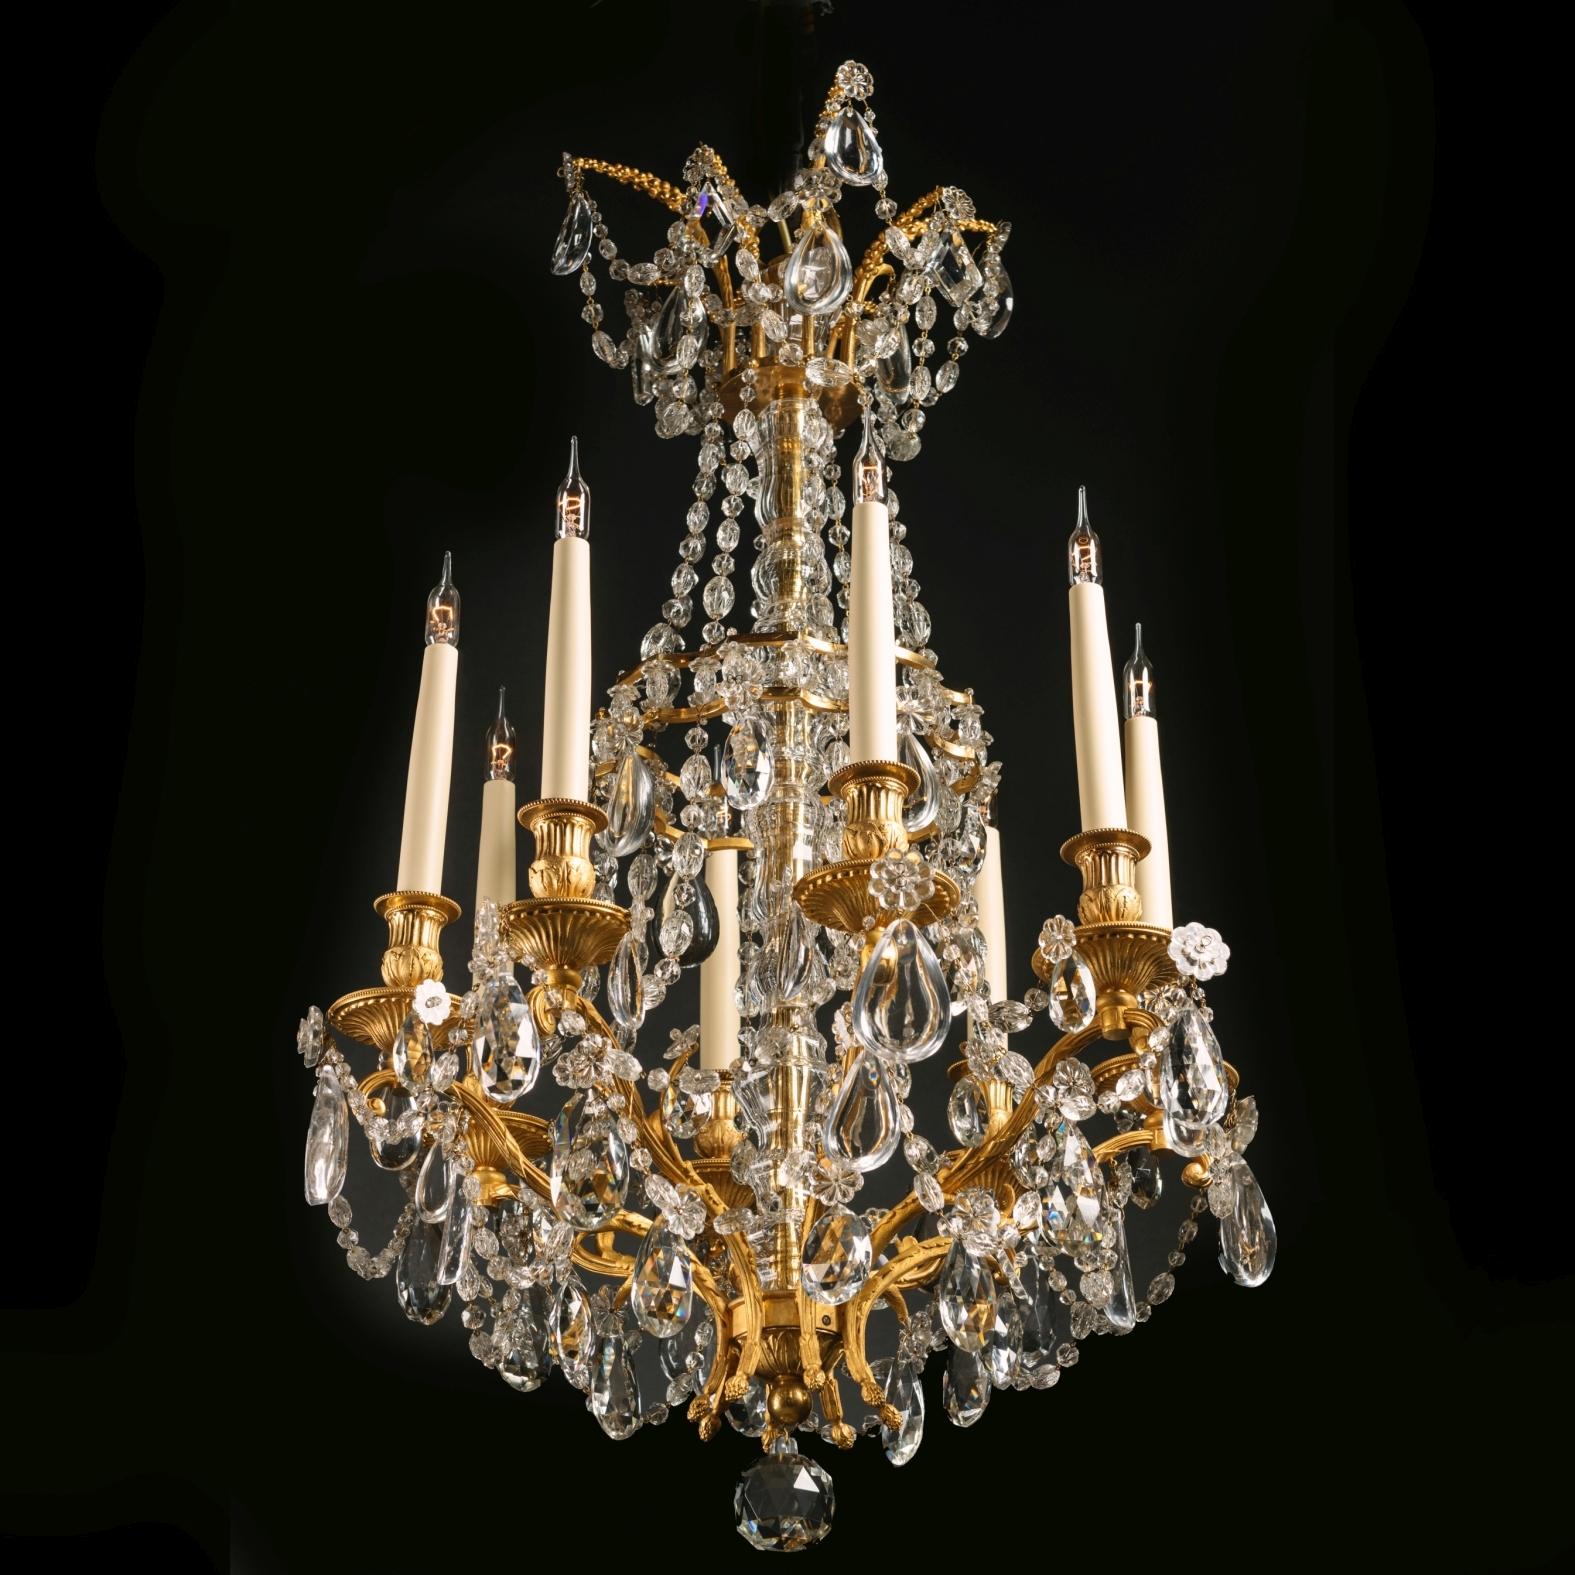 A fine Louis XVI style gilt-bronze and cut-glass eight-light chandelier,
French, Circa 1900.